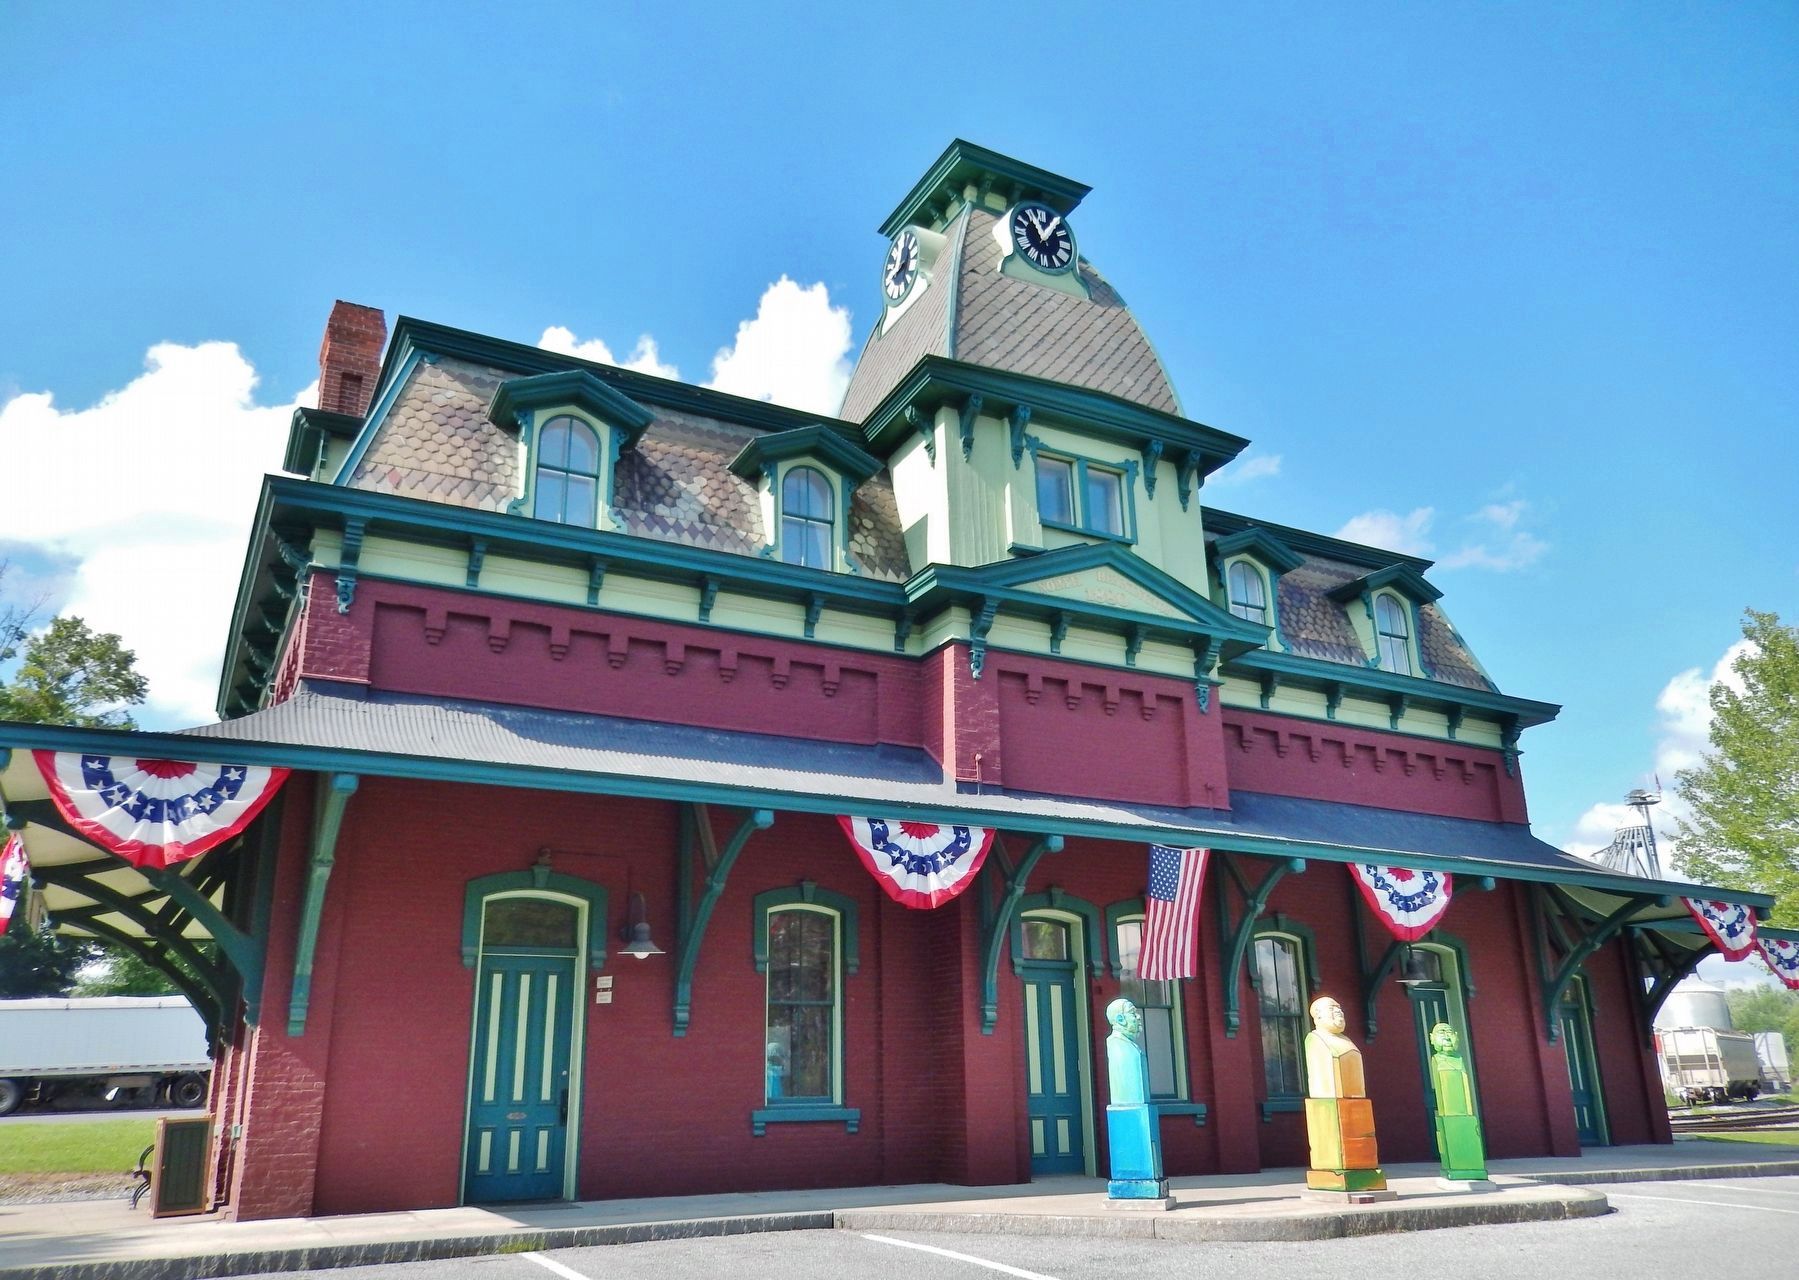 North Bennington Railroad Station (<i>front view from parking lot</i>) image. Click for full size.